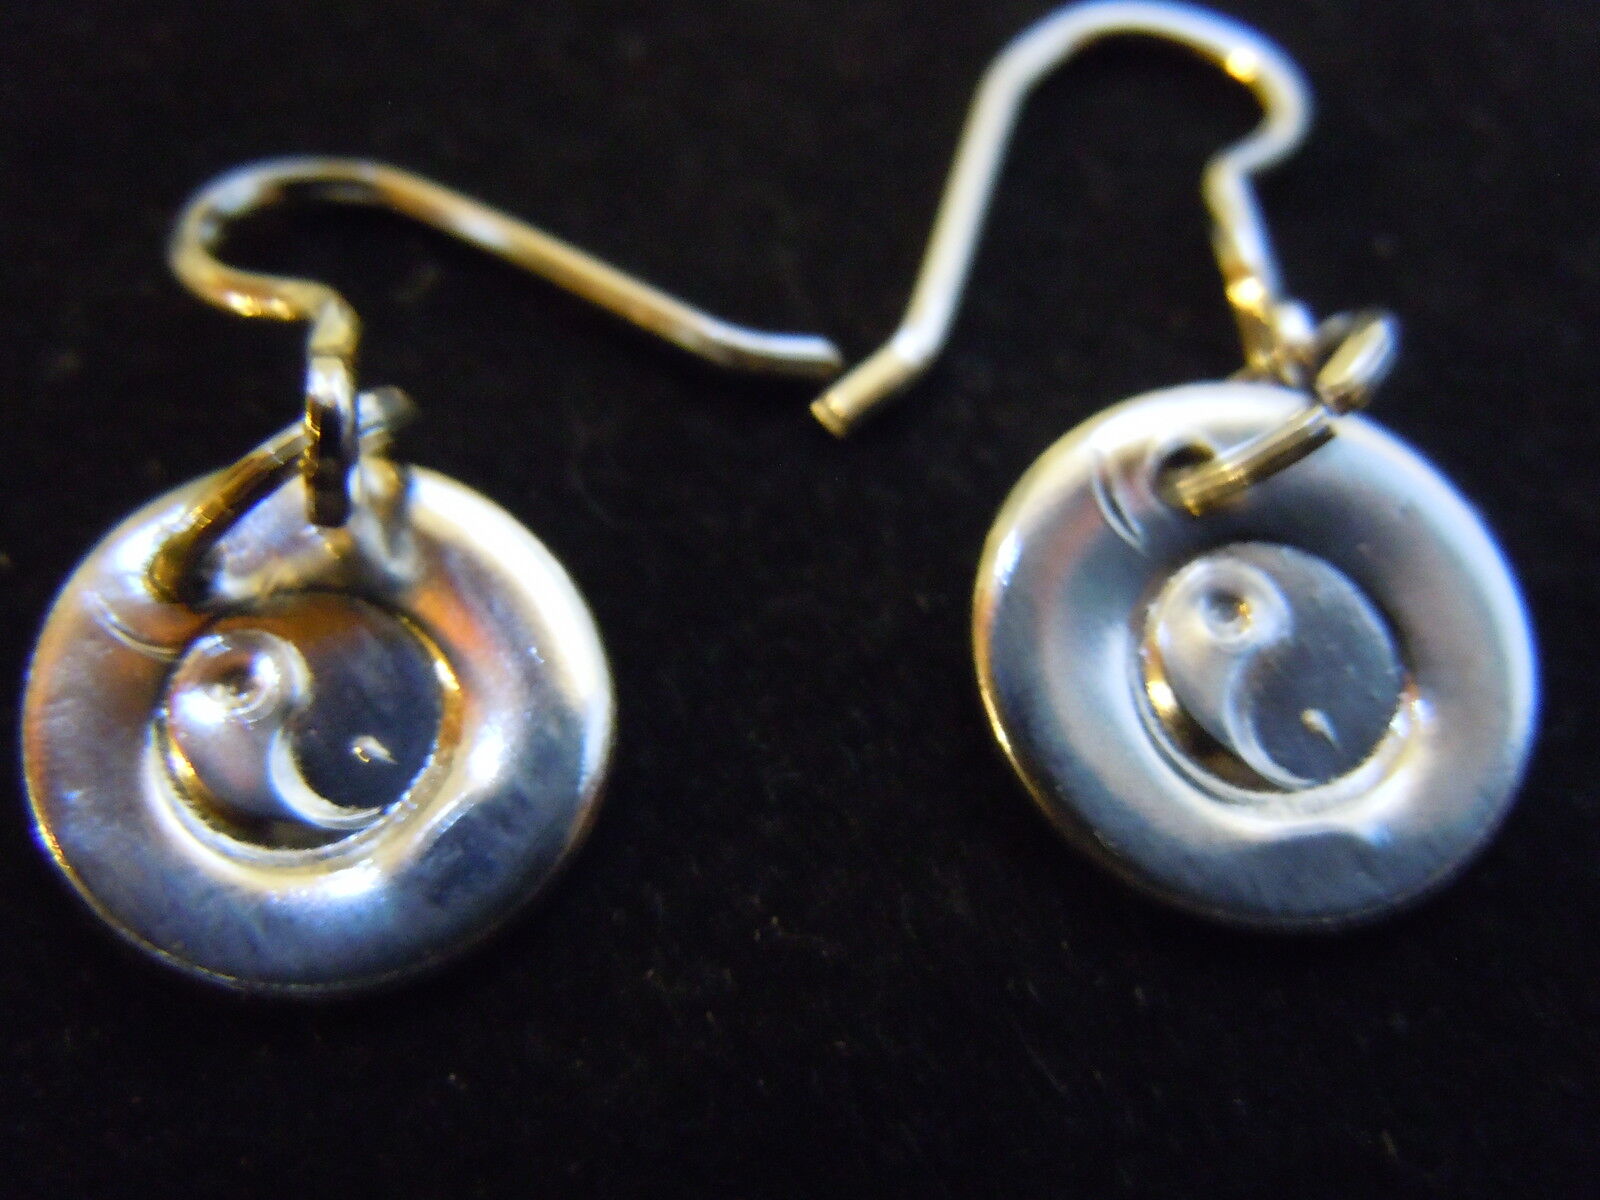 NEW PURE SILVER .999 BULLION EARRINGS HAND MADE ANARCHY P.M. JEWELRY #E230